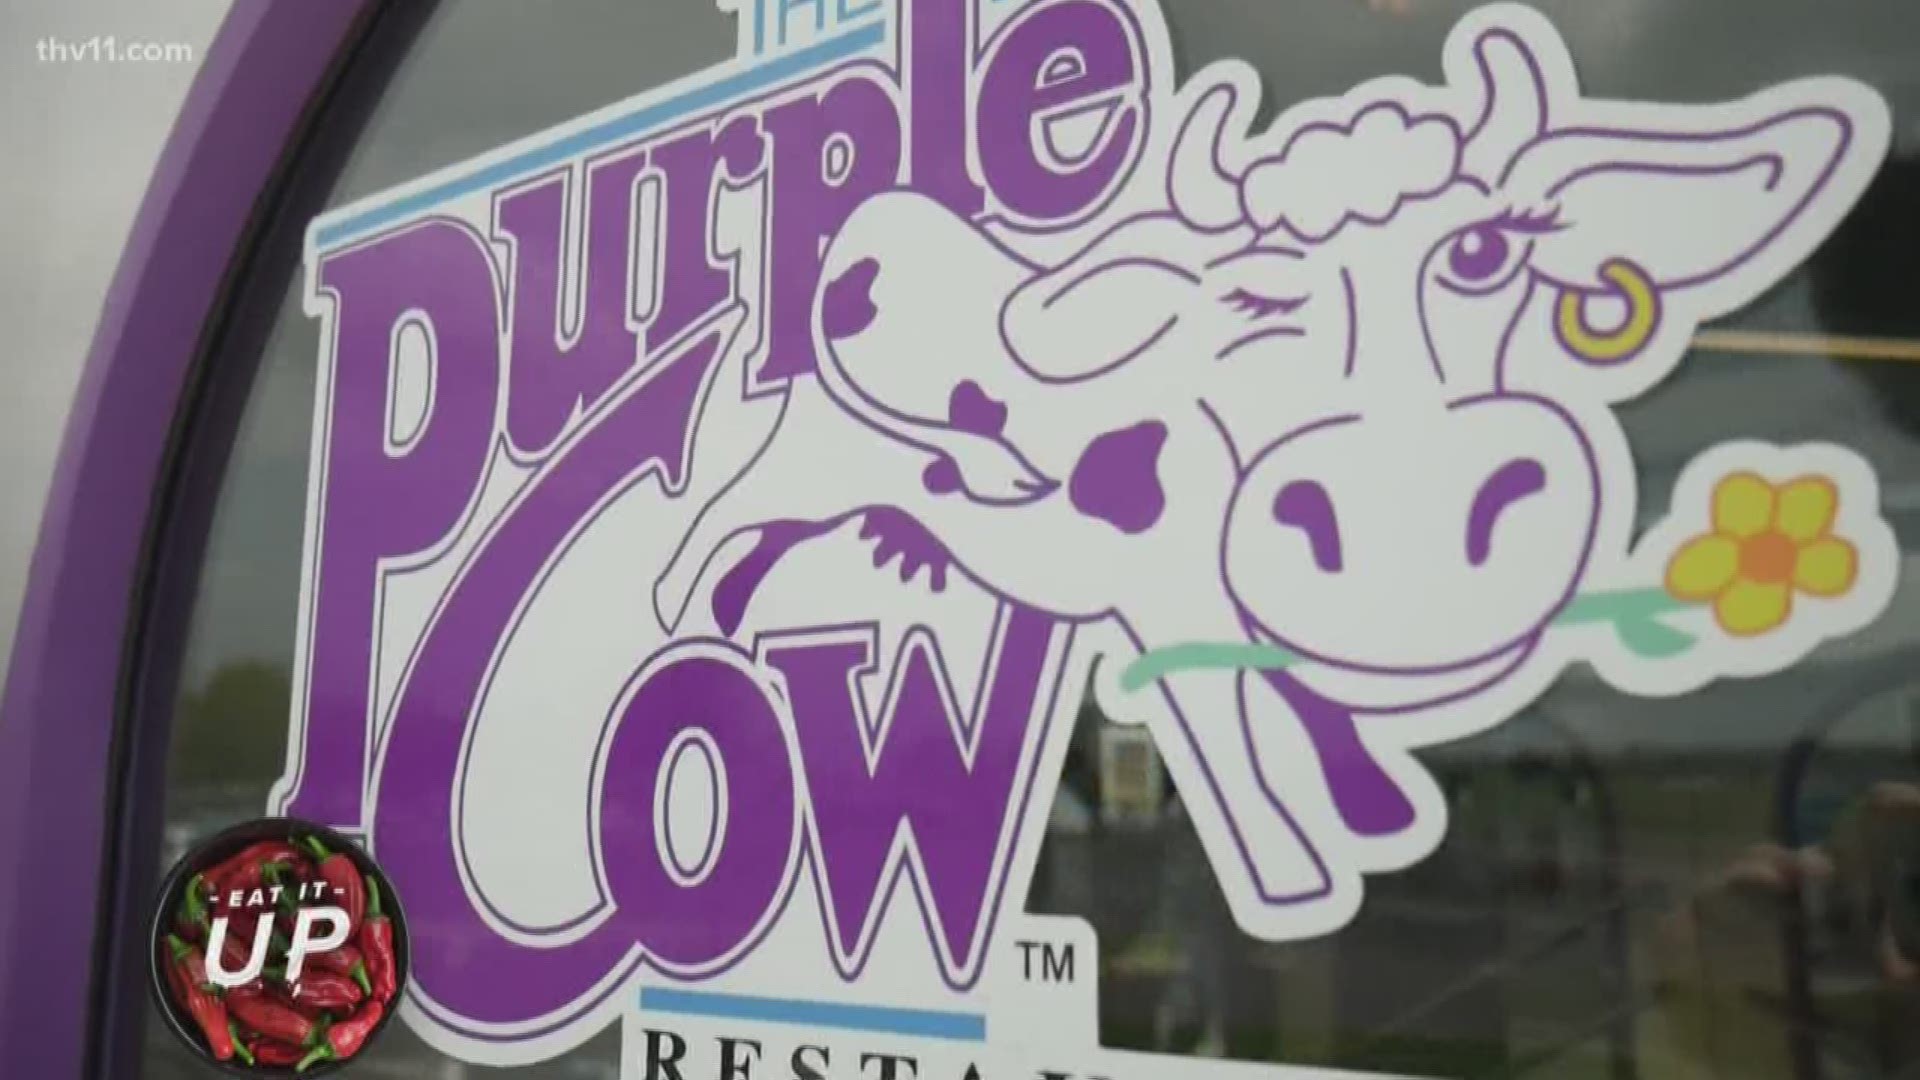 Purple Cow is a locally owned small franchise in Little Rock that is famous for their Purple Milkshakes, cheese dip and more!